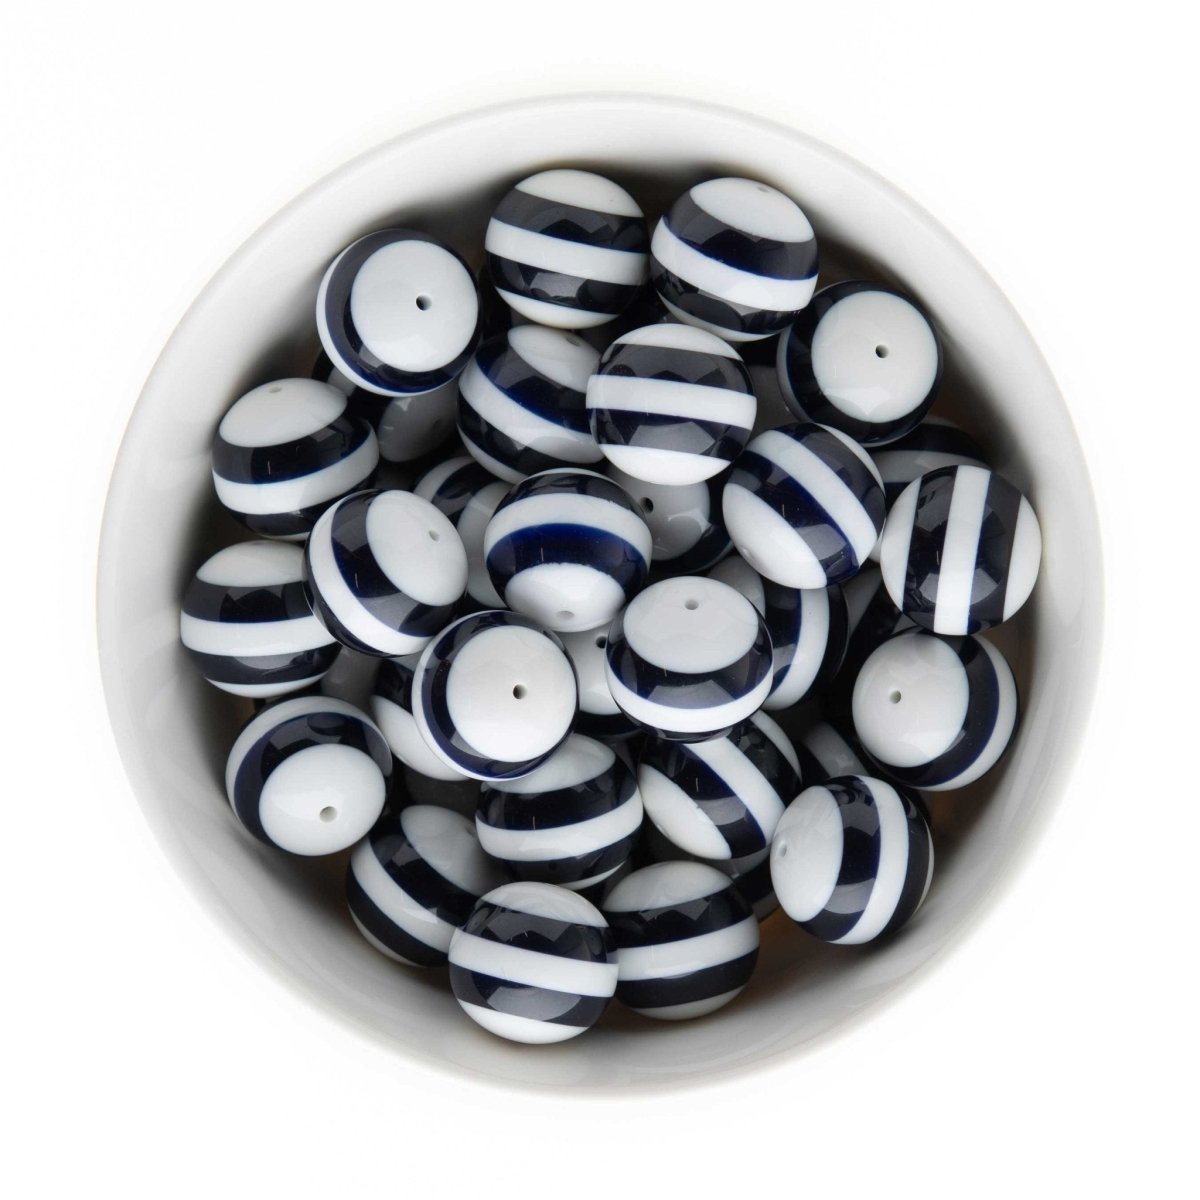 Acrylic Round Beads Striped 20mm Navy from Cara & Co Craft Supply